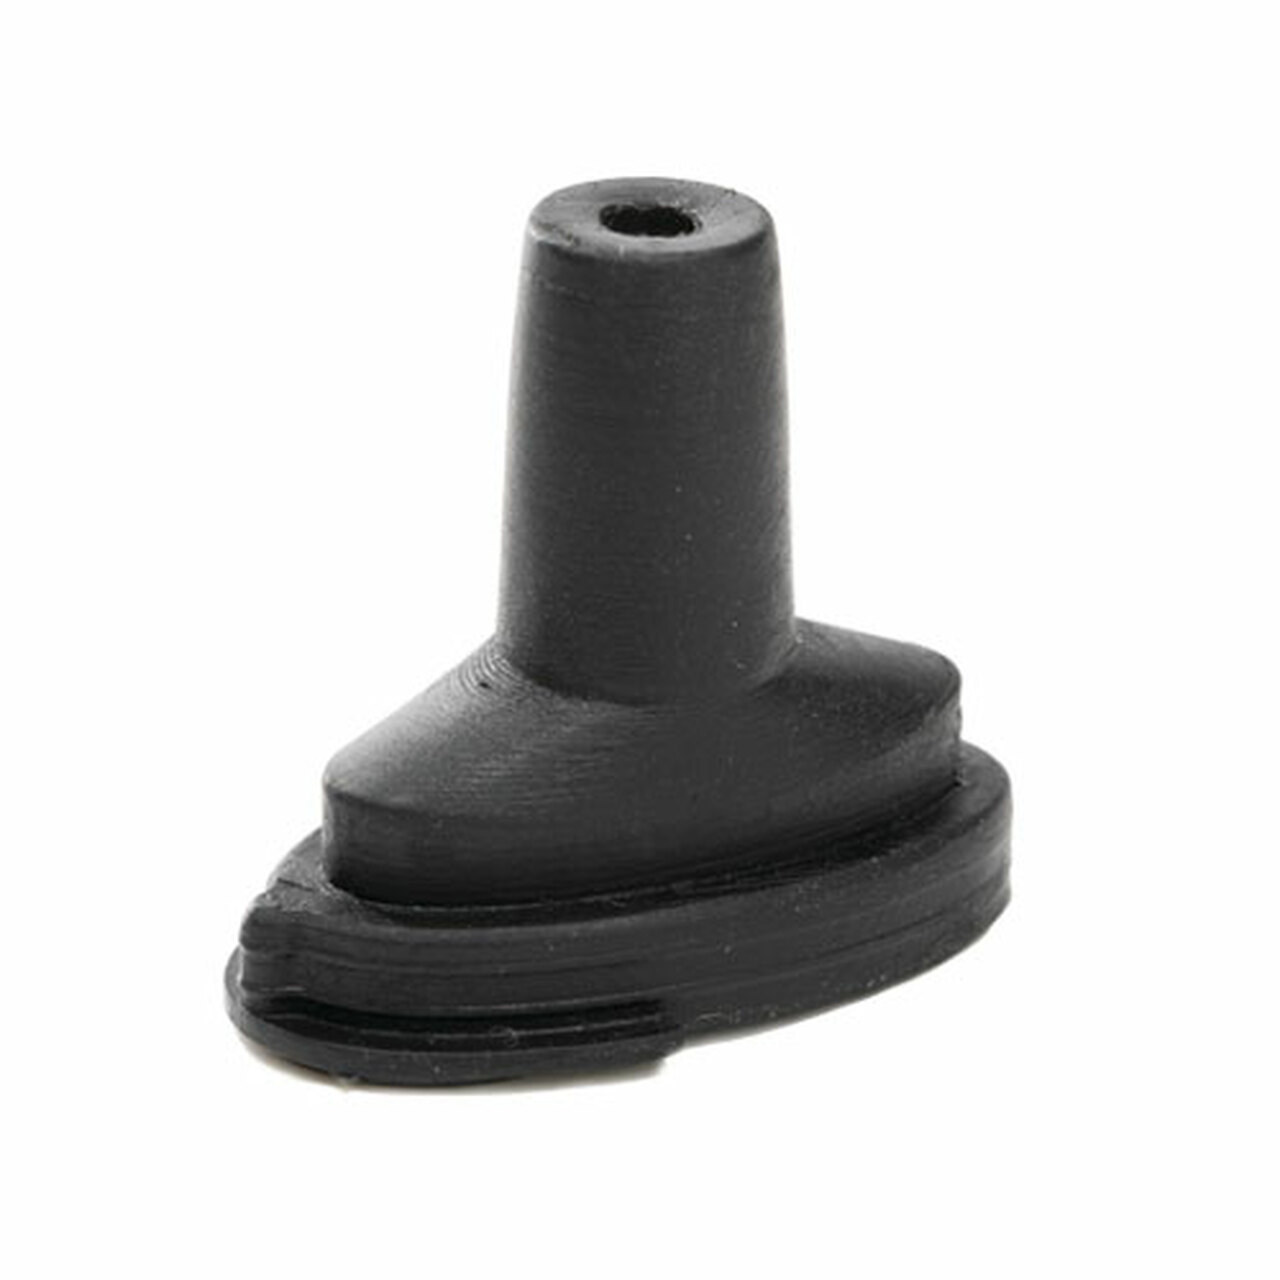 iqc-water-tool-adapter-silicone-500x500__31983.1630455257